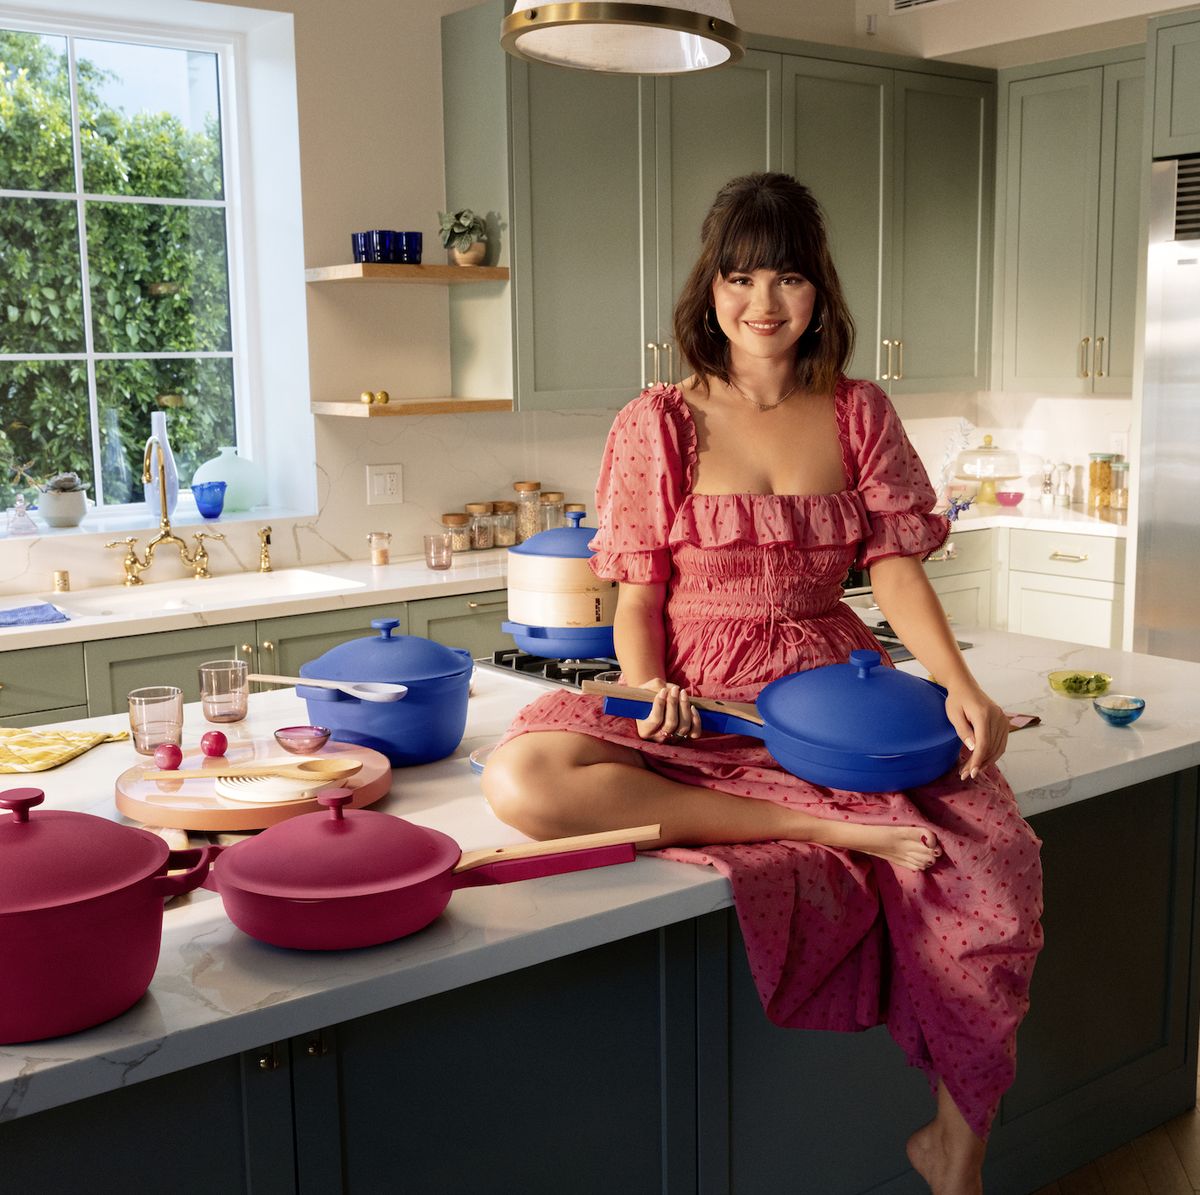 Selena Gomez sparks joy with a new cookware collection